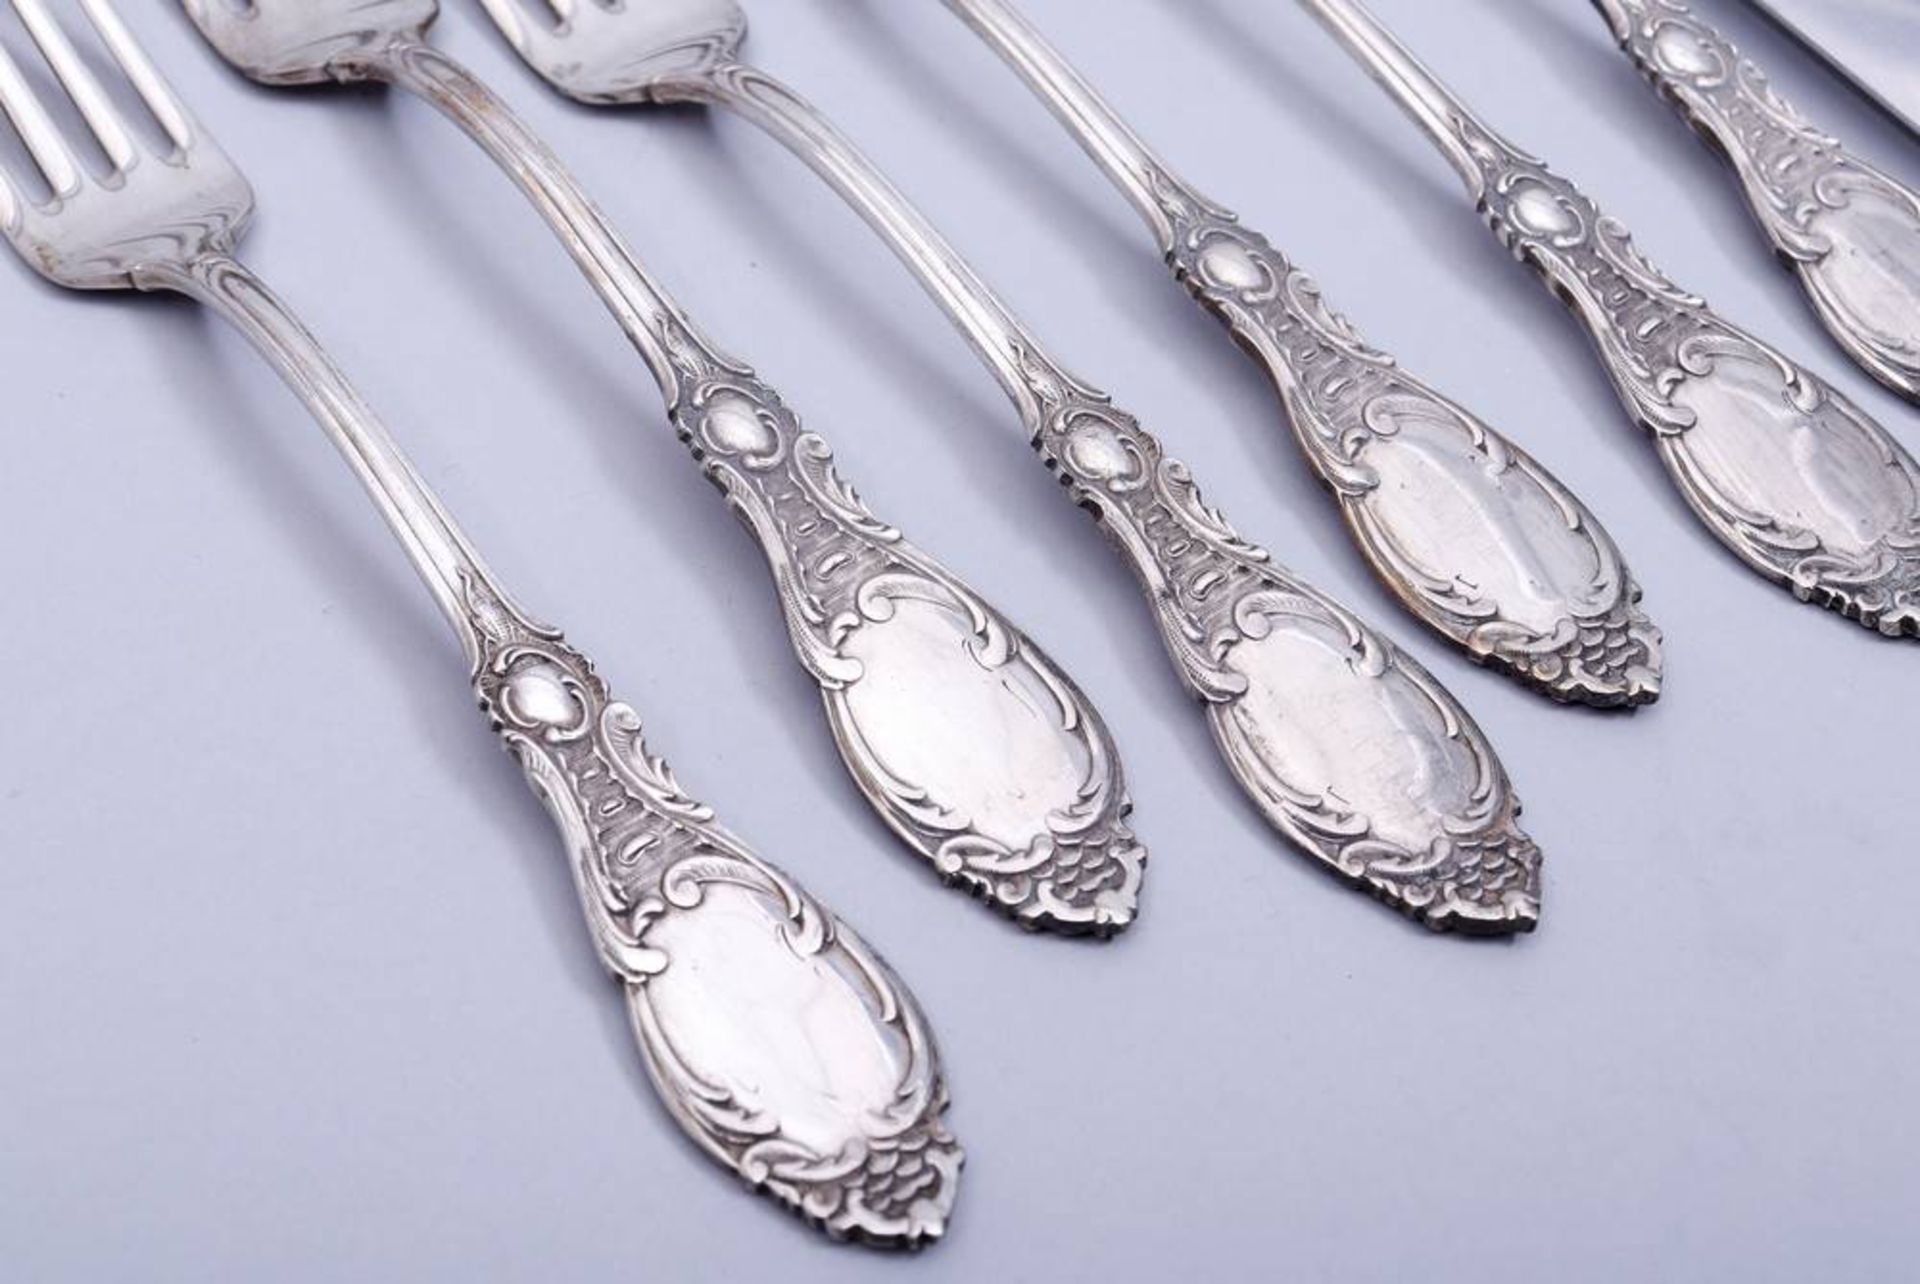 Small Cuttlery-Set silver, 800, german, ca. 1900, 12 pieces, Rocaille decoration, 6 knives and 6 - Bild 2 aus 6